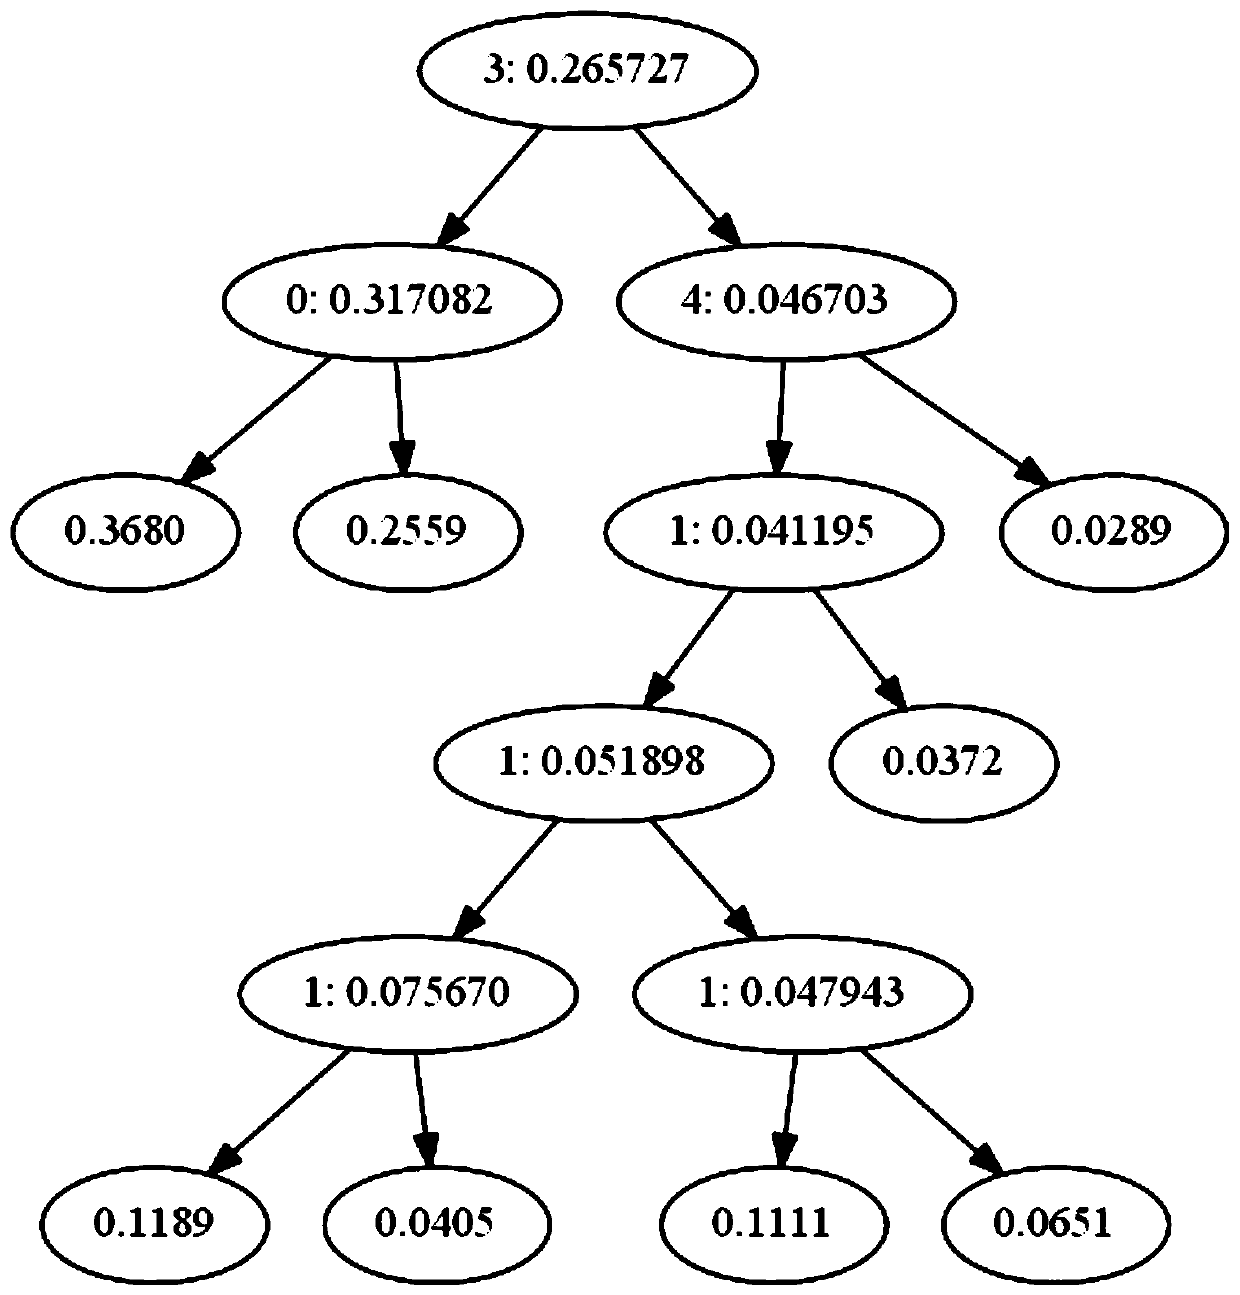 A power grid investment prediction method based on an AdaBoost regression tree model